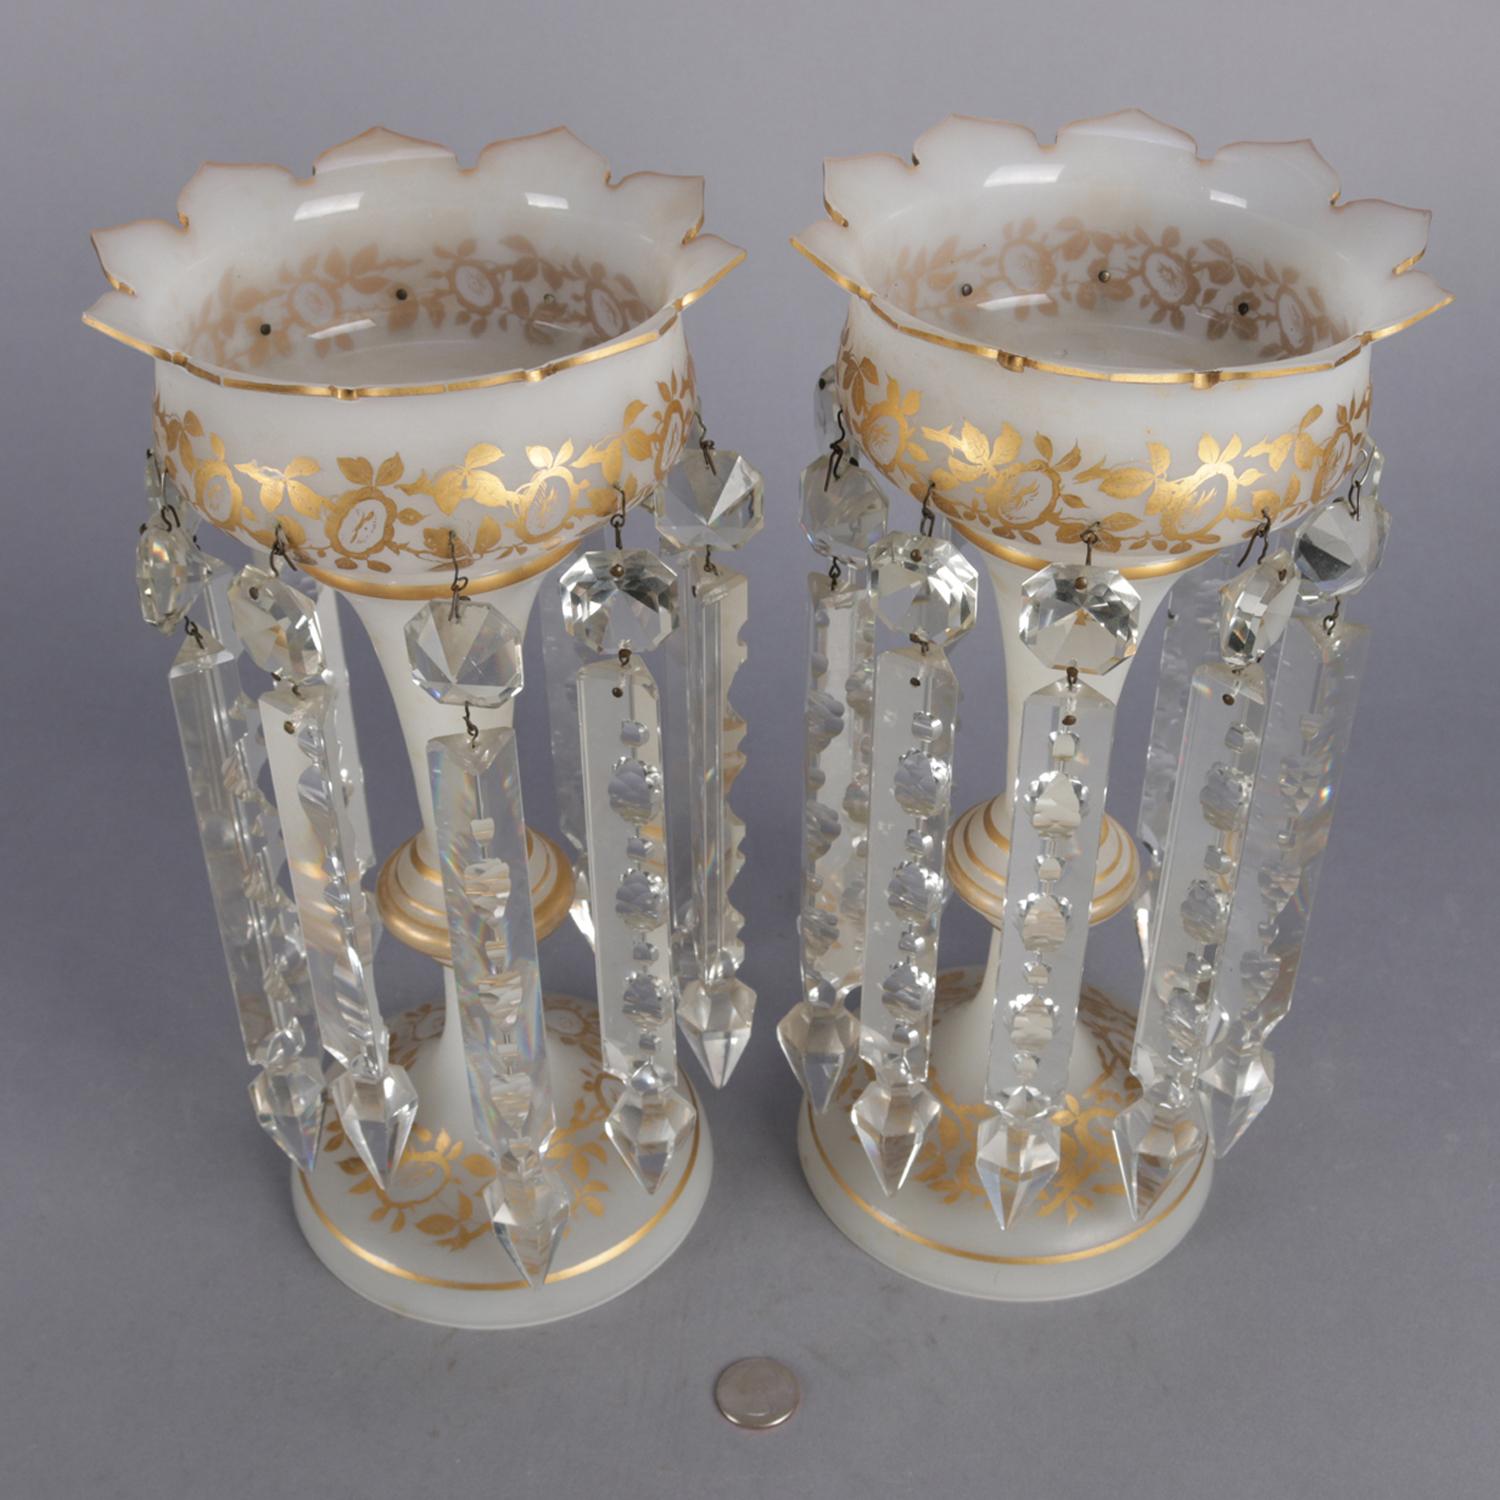 19th Century Pair of Victorian Gilt Frosted Glass and Cut Crystal Mantel Lustres with Prisms